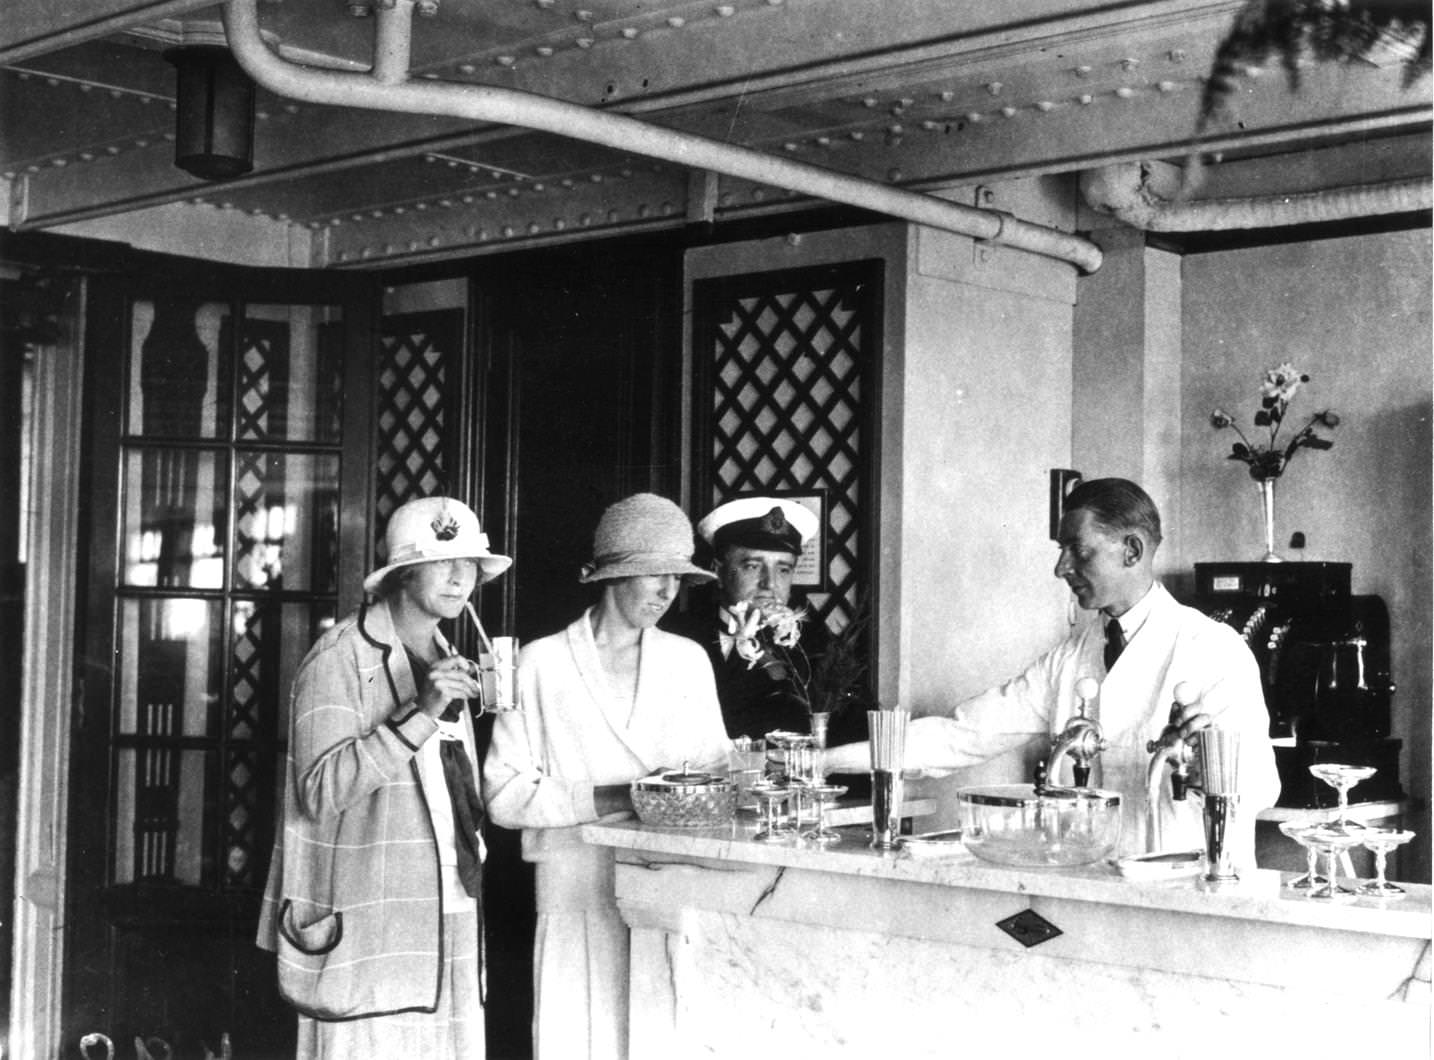 A barman serves drinks to a couple of women at the soda fountain on board the Cunard liner Aquitania, 1920s